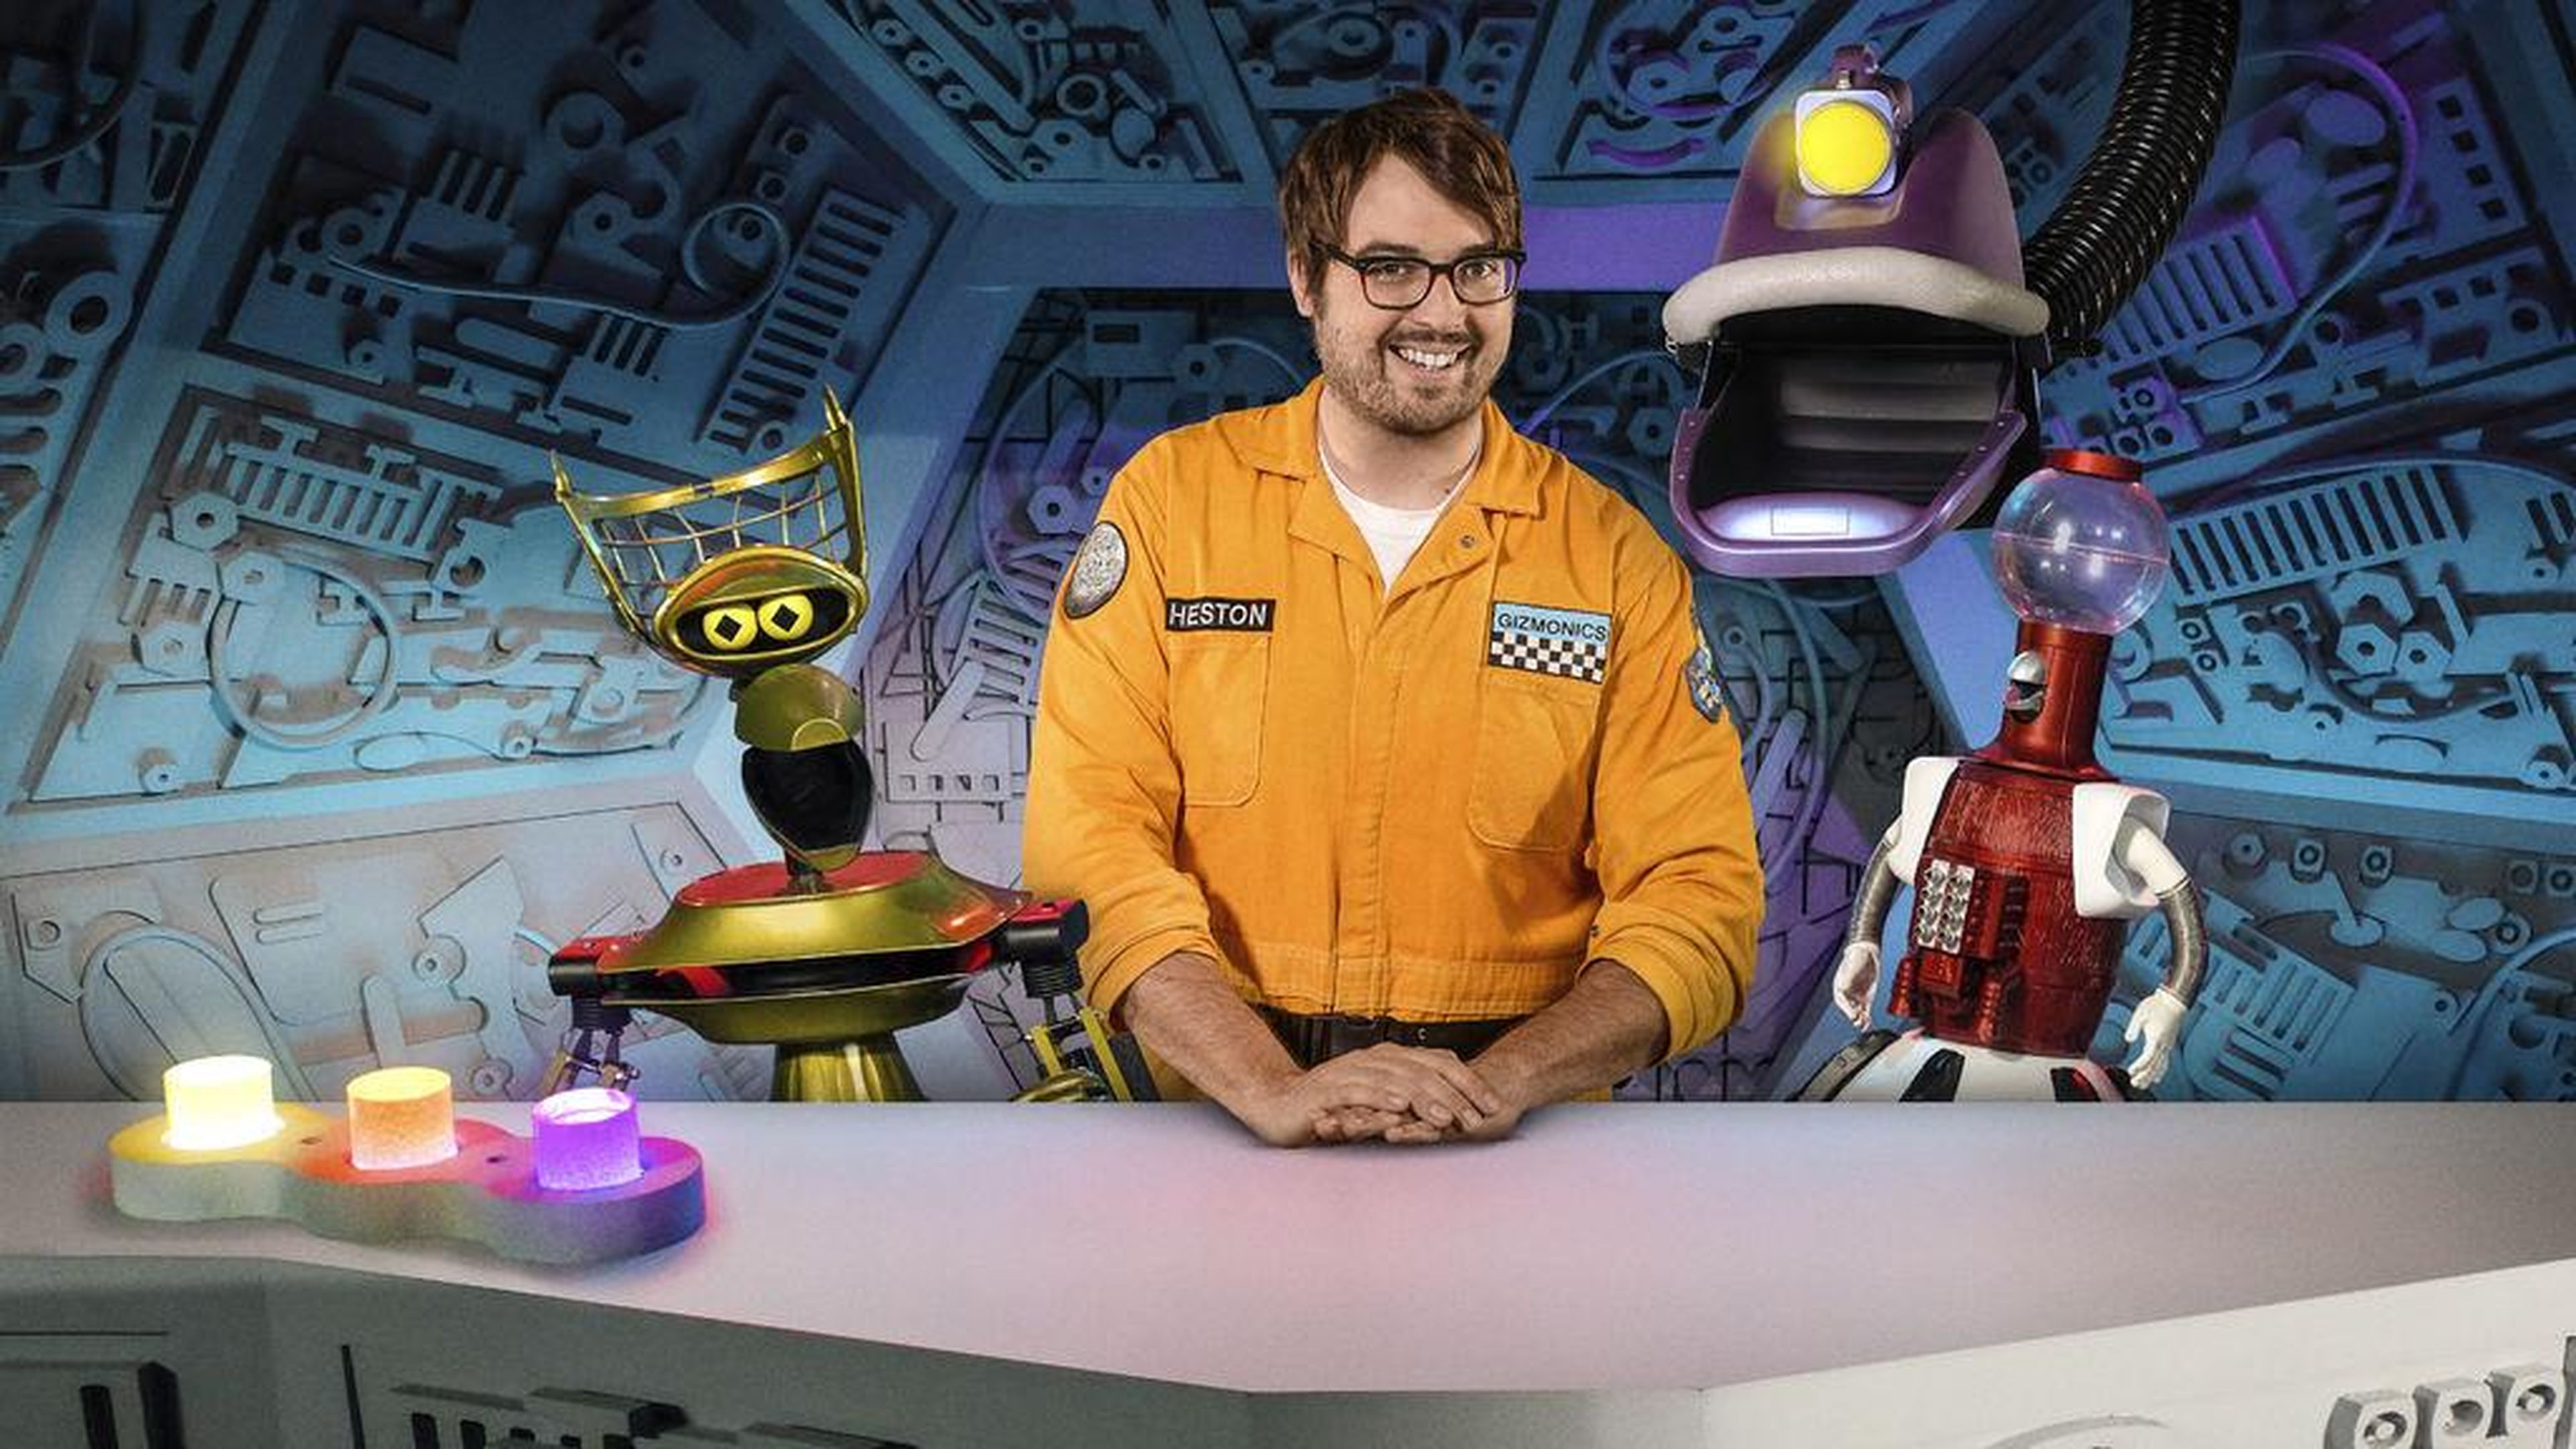 1. "Mystery Science Theater 3000" — canceled after 2 seasons